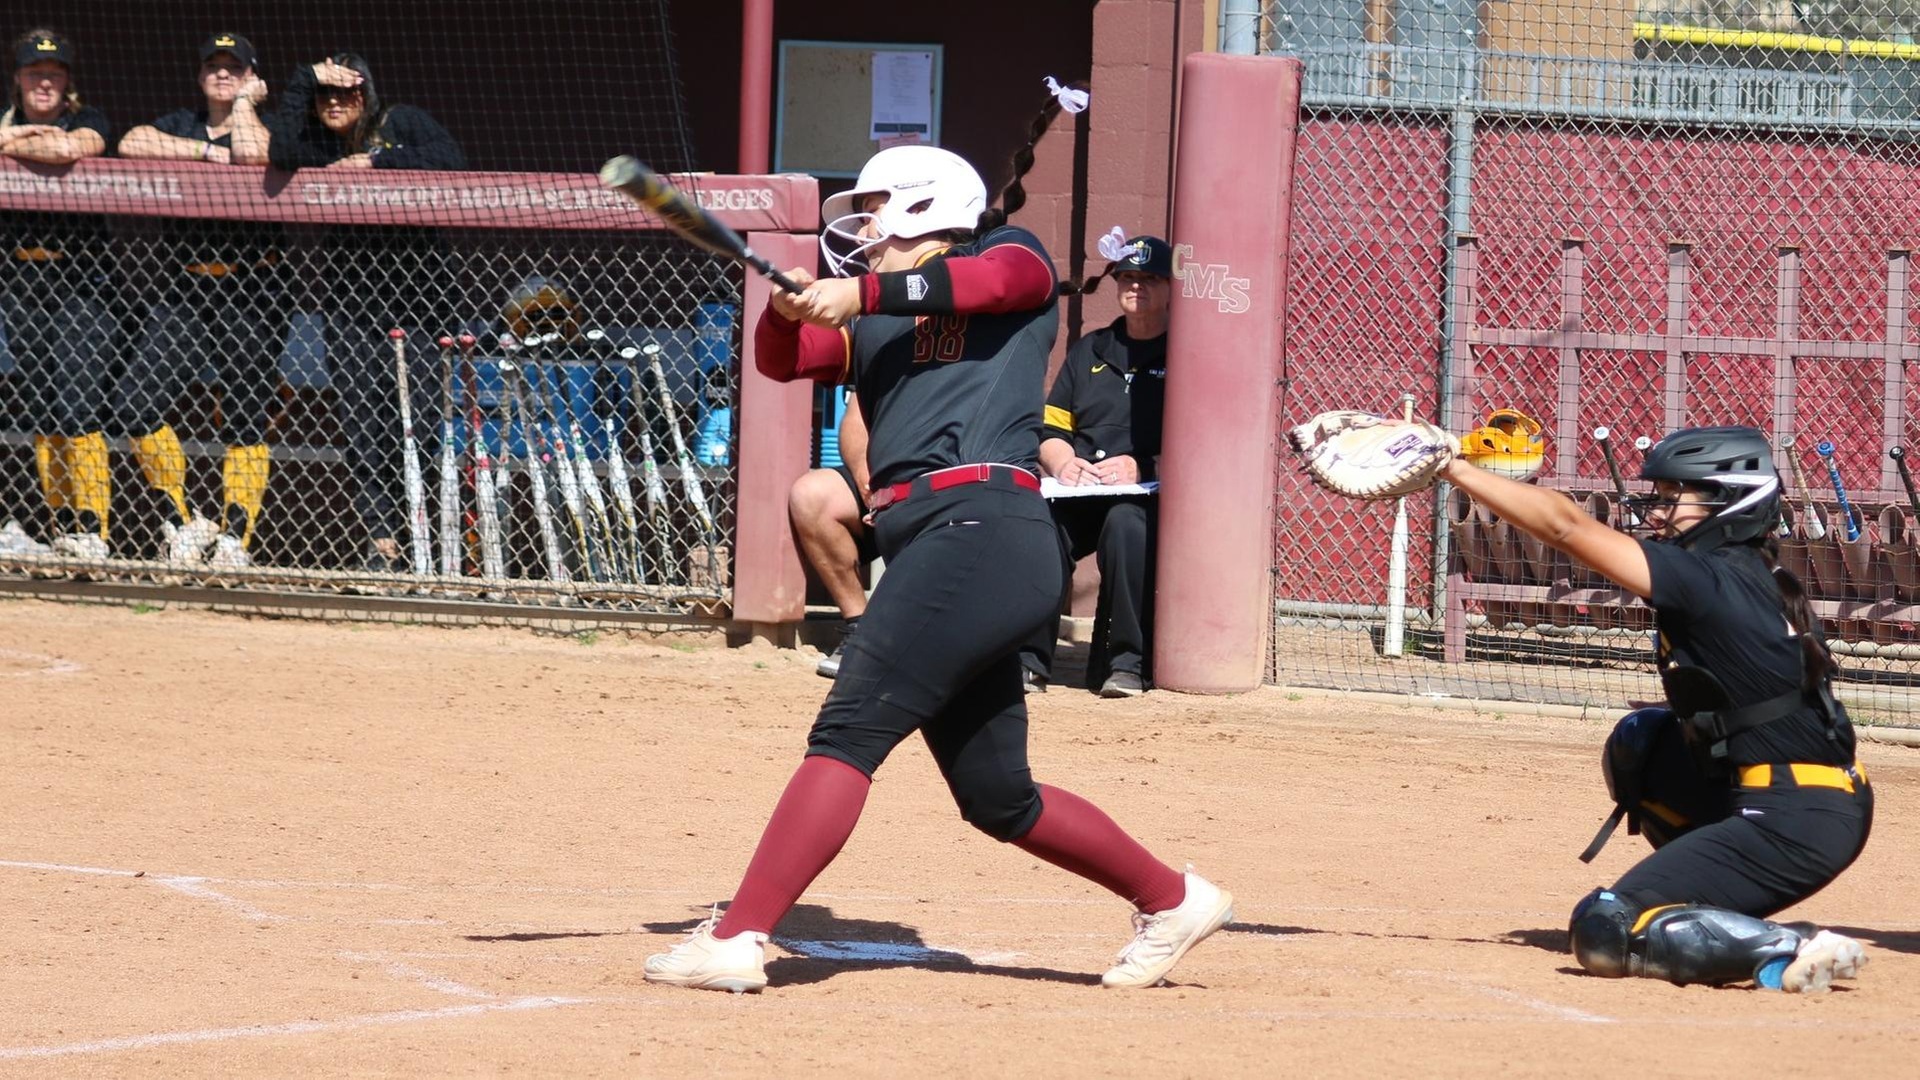 Madison Gonzalez hit a big three-run homer in the opener (photo by Sun Young Byun)